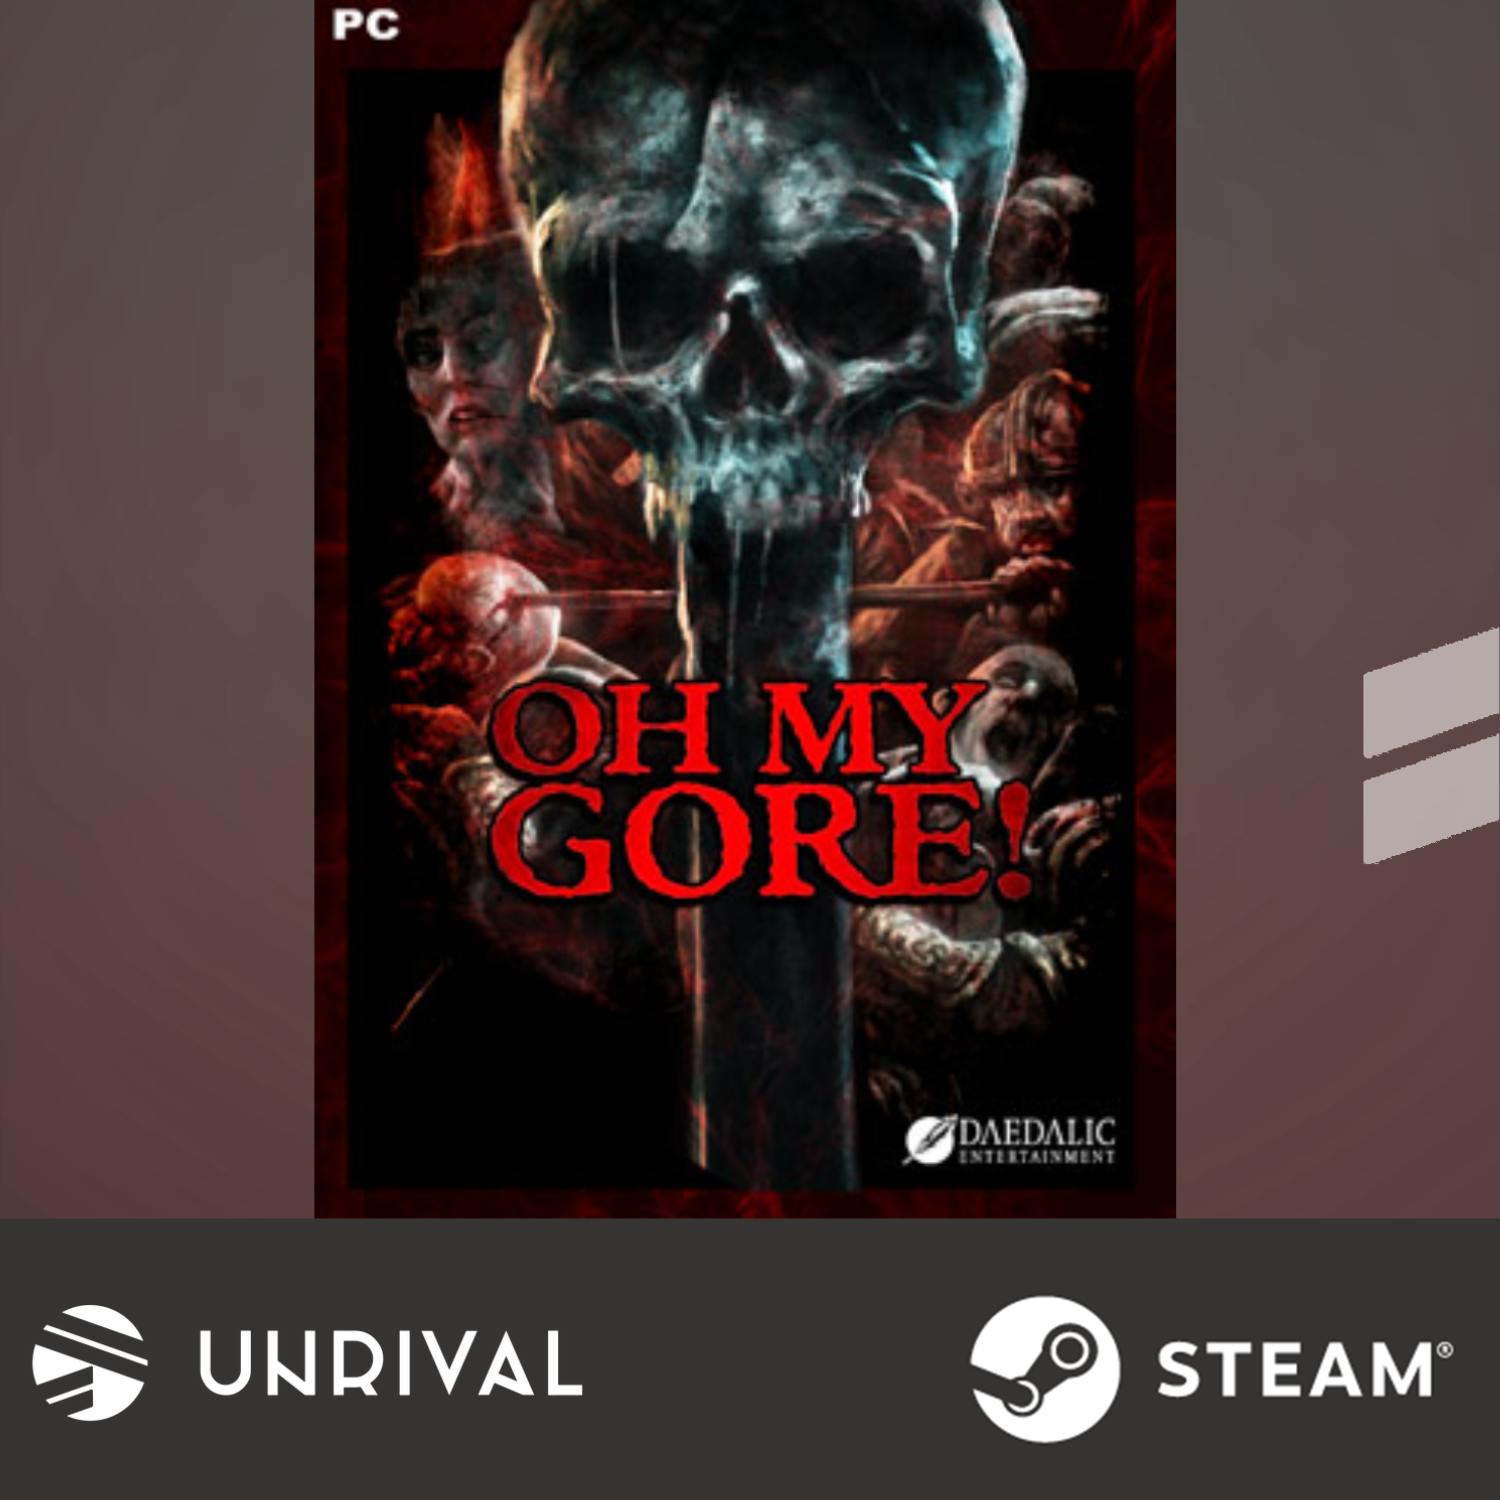 [Hot Sale] Oh My Gore! PC Digital Download Game (Single Player) - Unrival